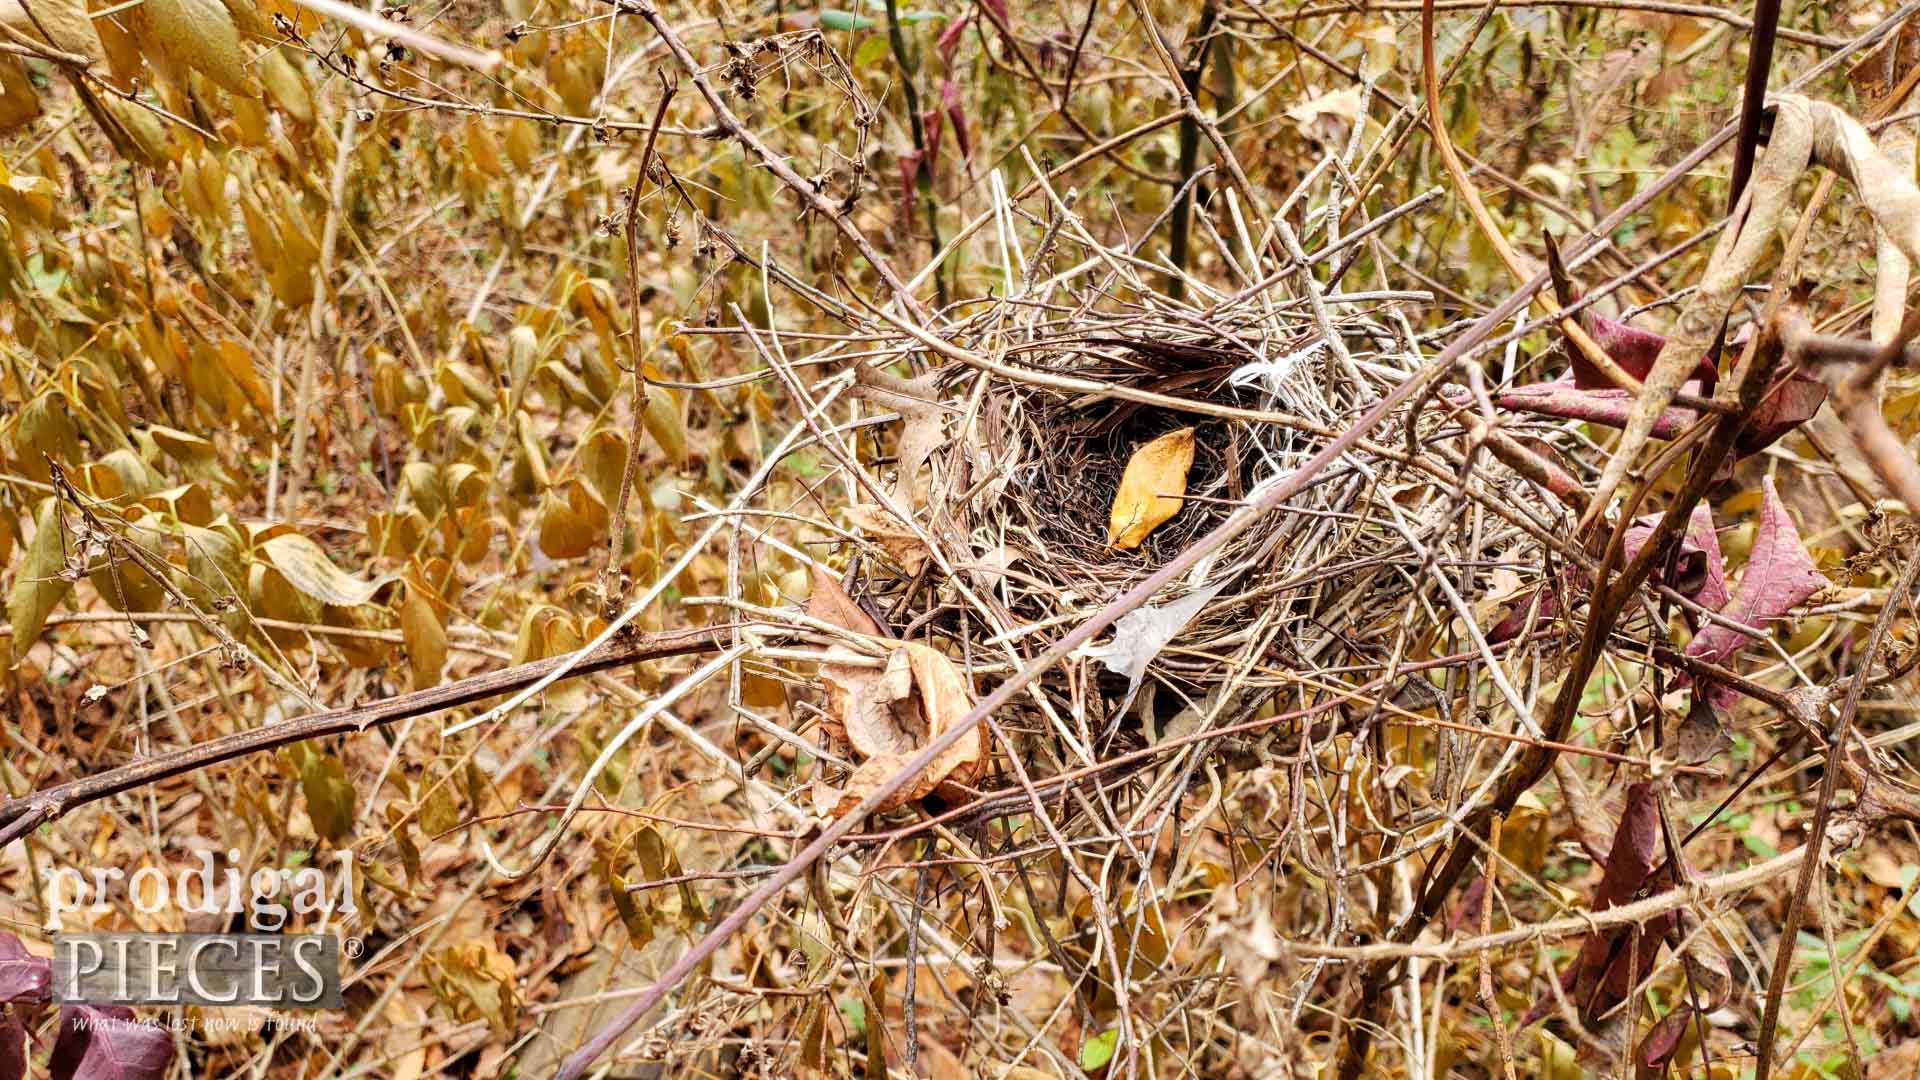 Leave birds' nests be in the wild. | prodigalpieces.com